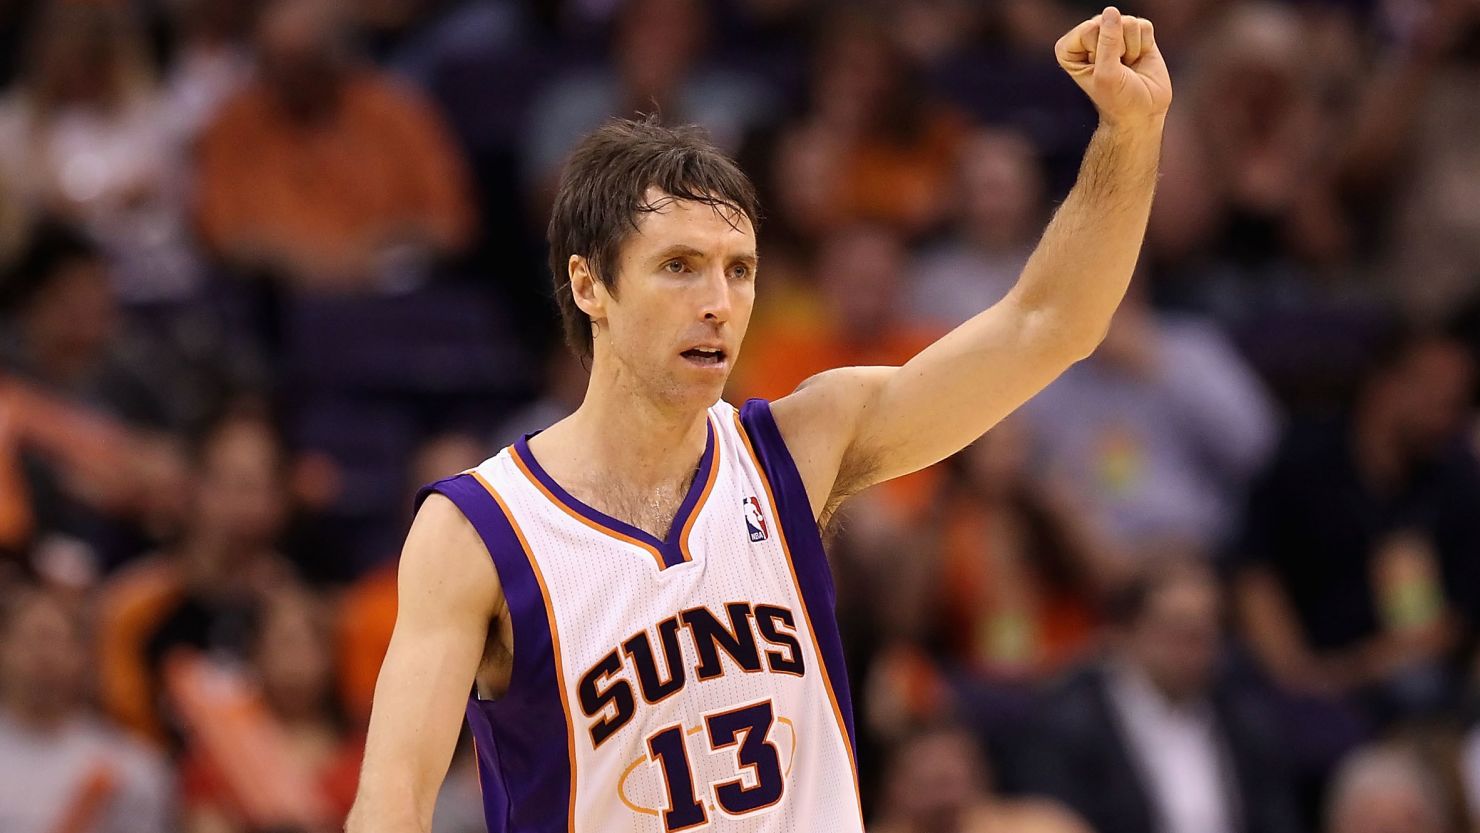 Former NBA point guard Steve Nash was the focal point of the Phoenix Suns "Seven Seconds or Less" offense. The two-time NBA MVP was also a standout college player at Santa Clara, despite emerging as an unheralded player from Canada.  